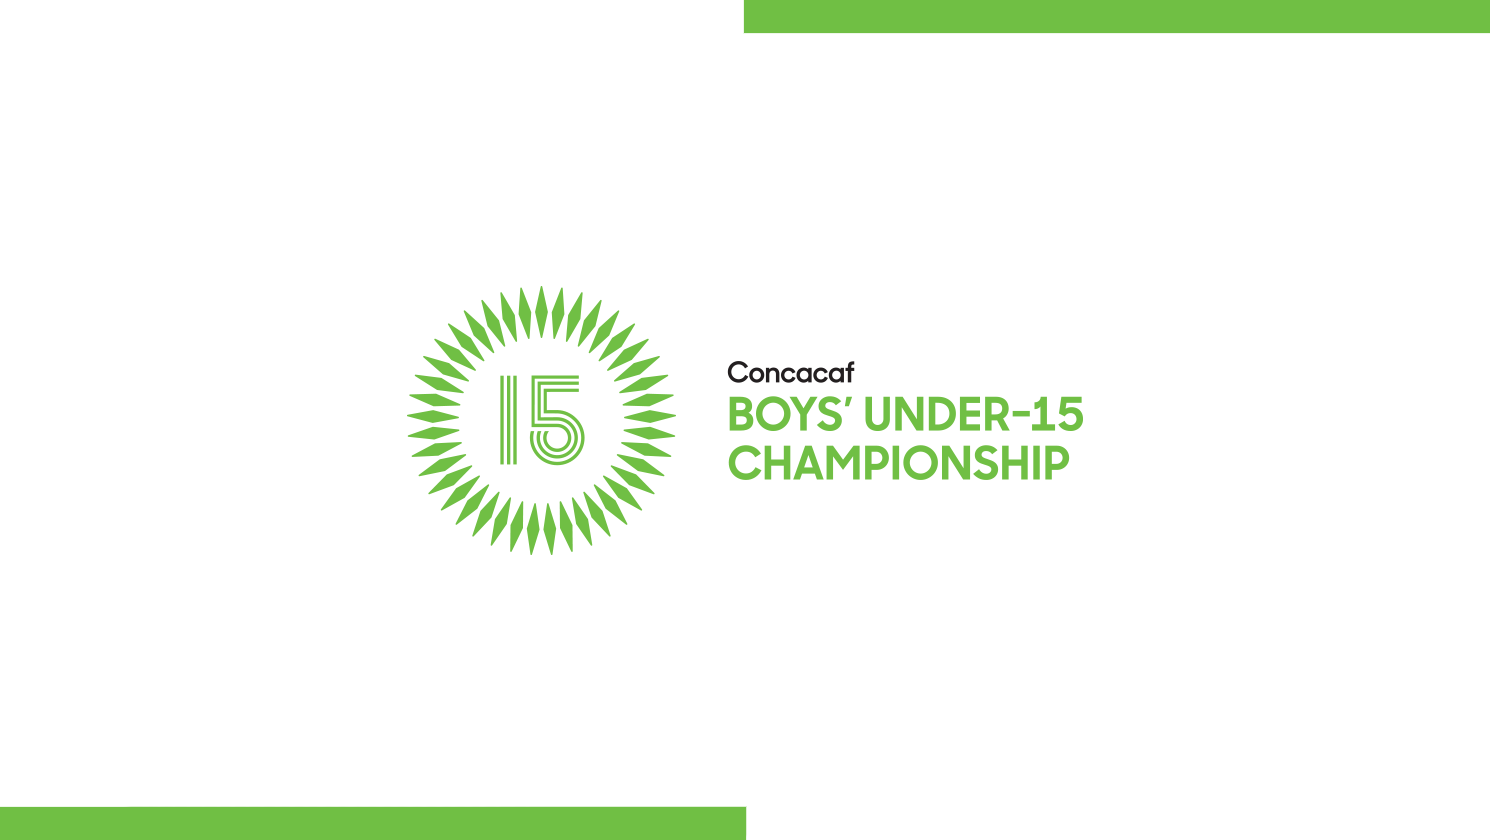 Groups and Schedule Confirmed for the 2019 Concacaf Boys’ Under15